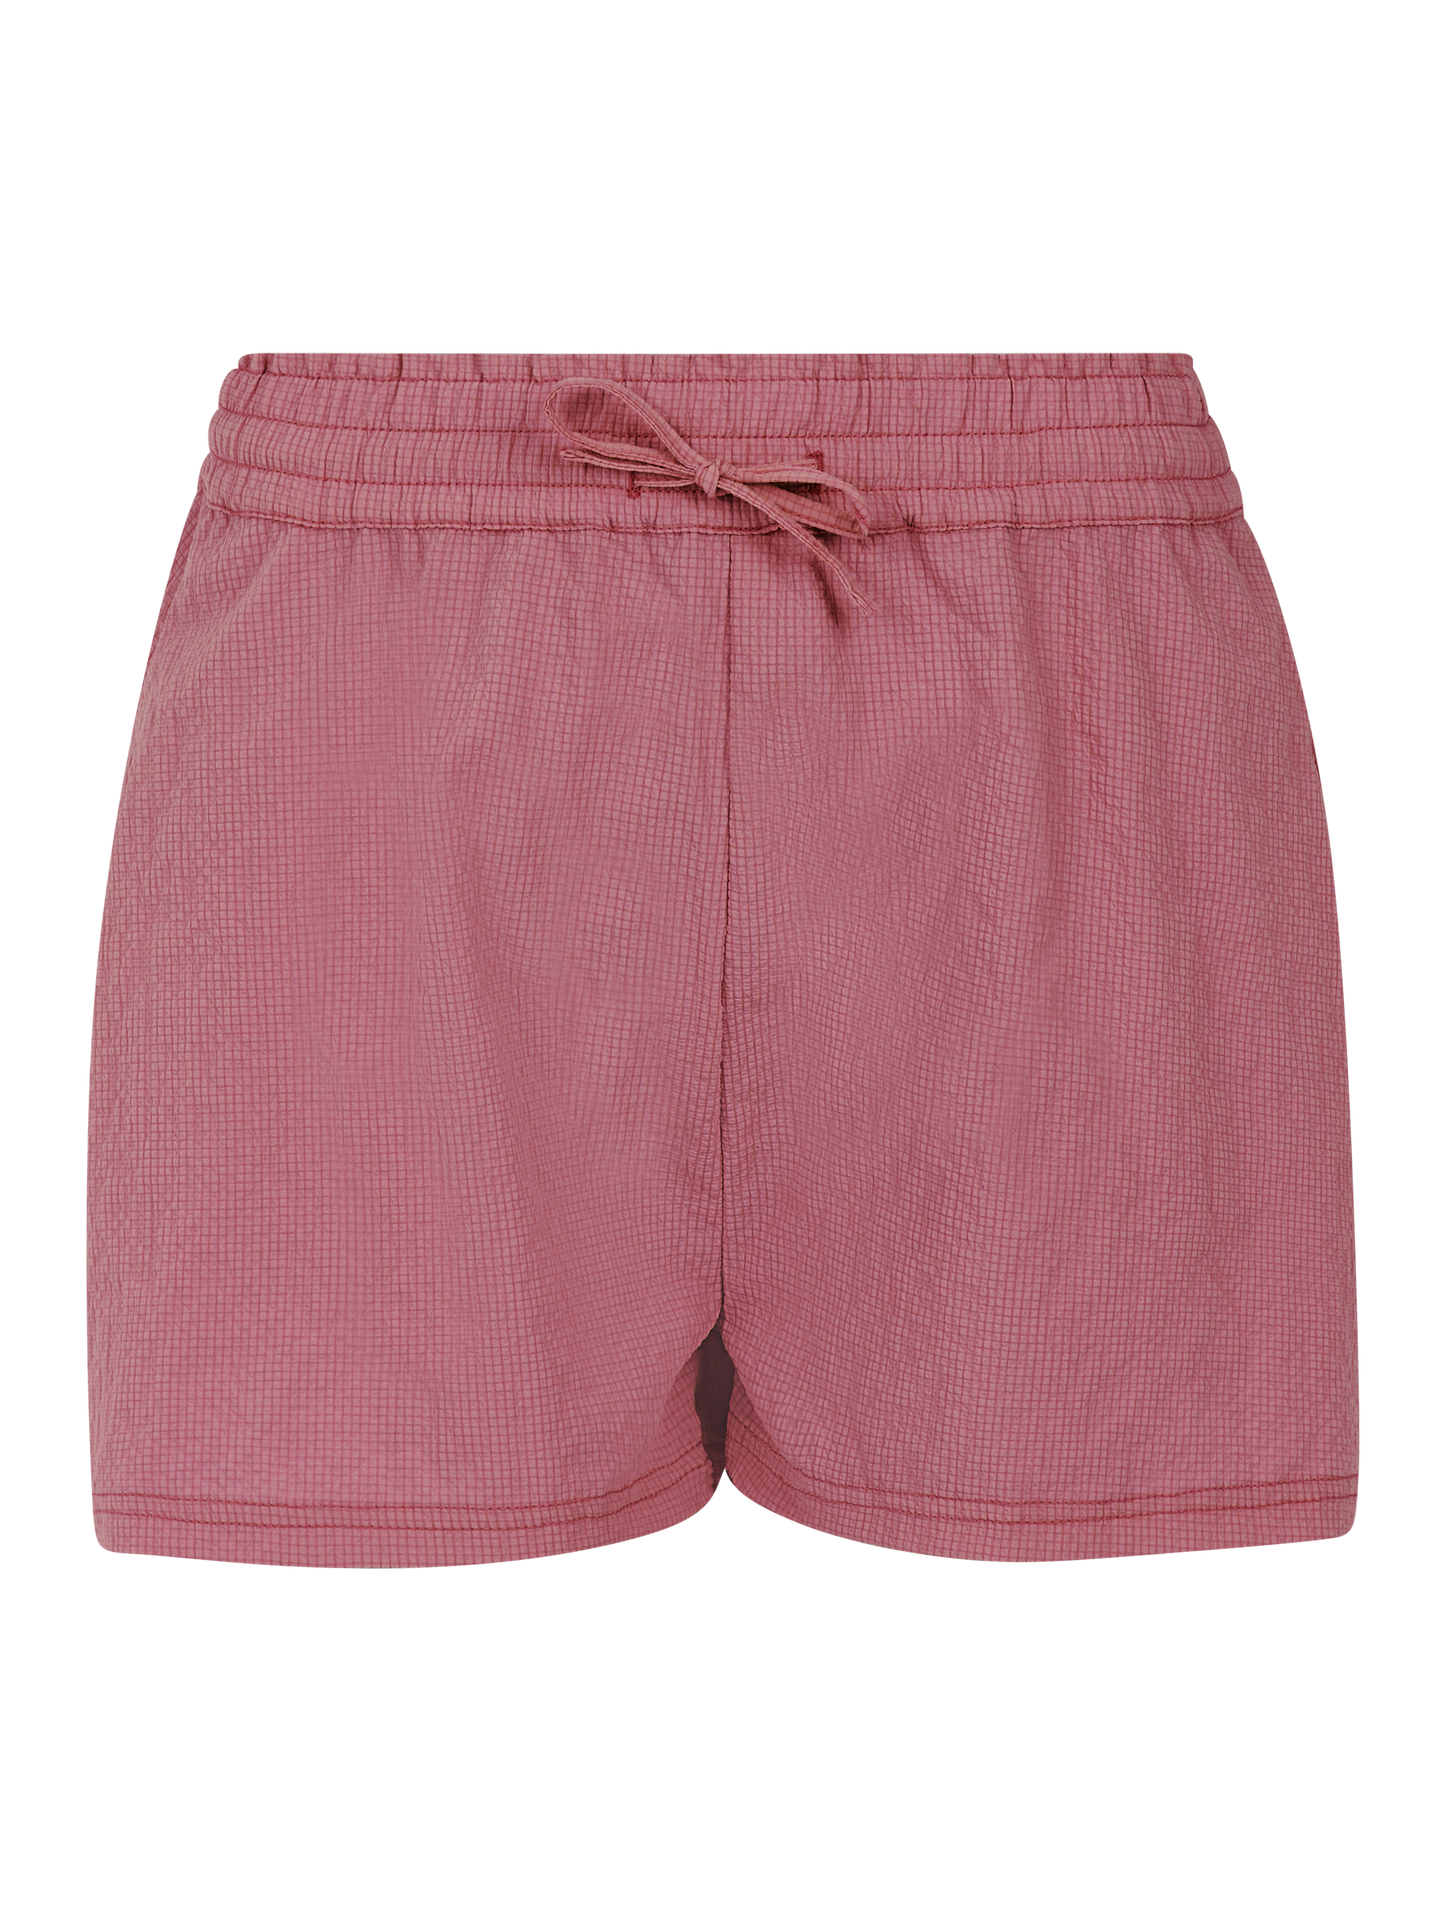 Protest Jailey Shorts in Deco Pink